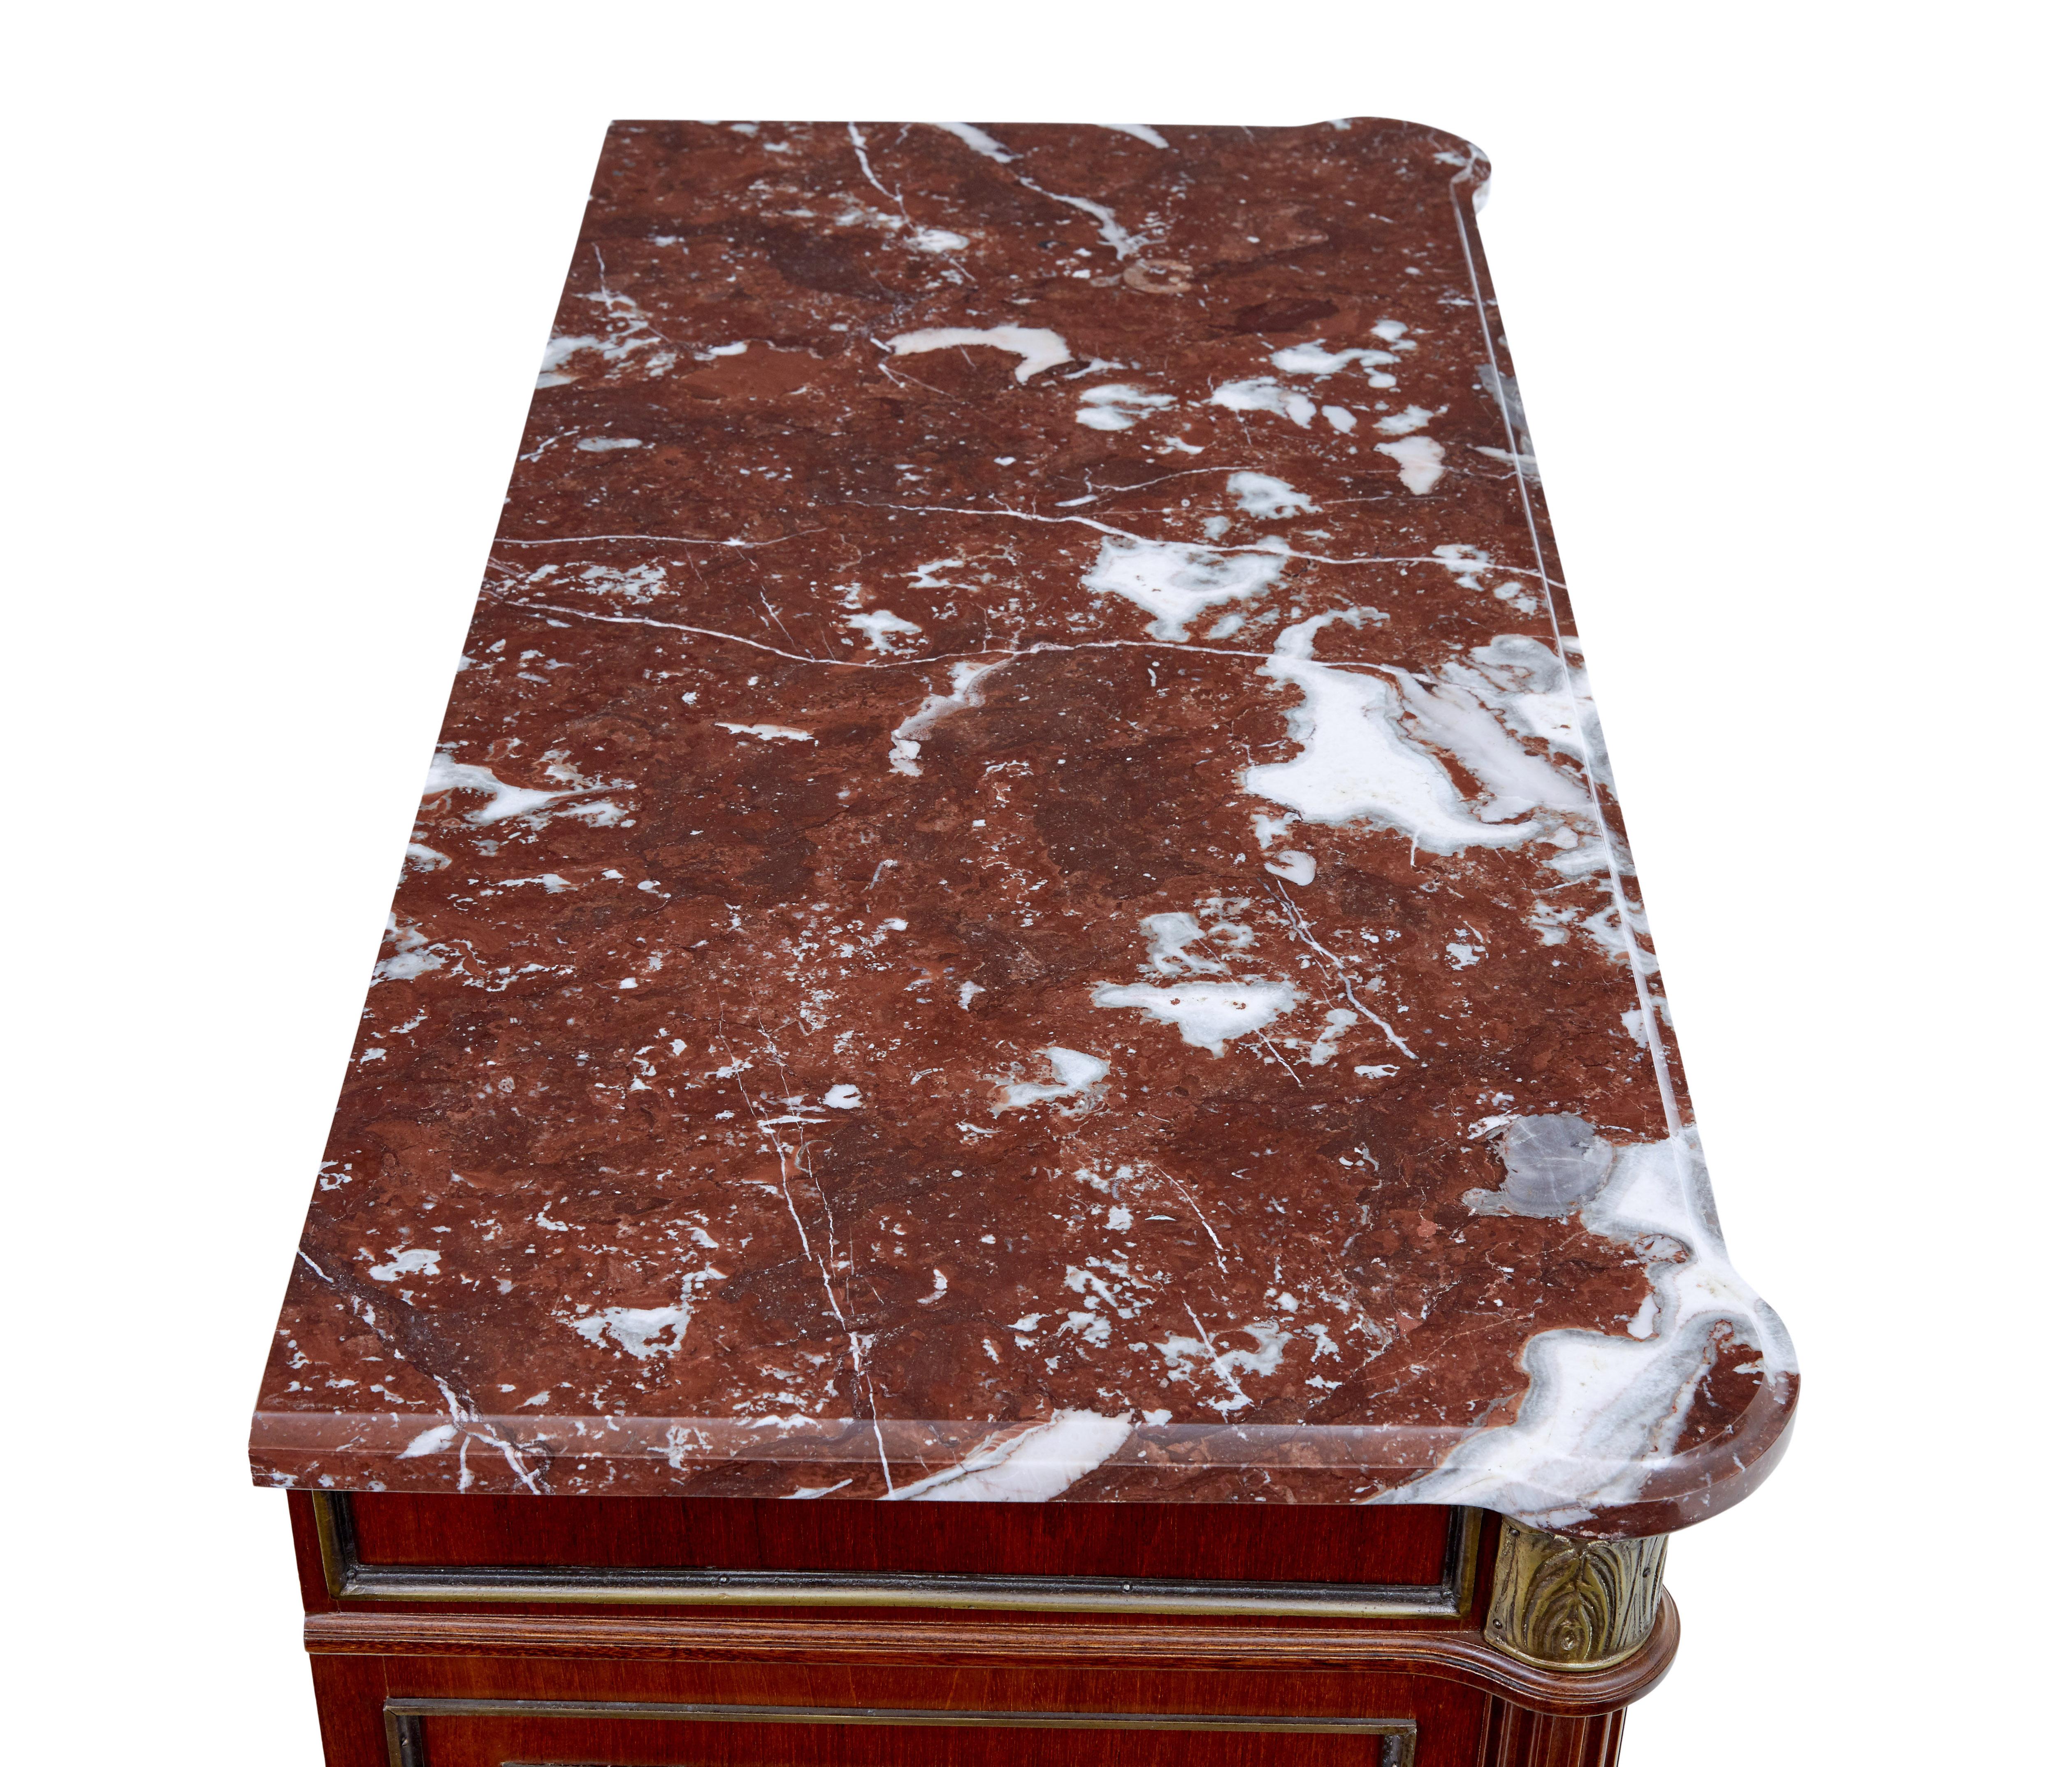 Mid 20th century mahogany marble top commode circa 1960.

Good quality chest of drawers in the rococo taste

Beautiful red and white marble top which is loose fitted.  Single drawer below the top surface with 2 ring handles, brass moulding and a